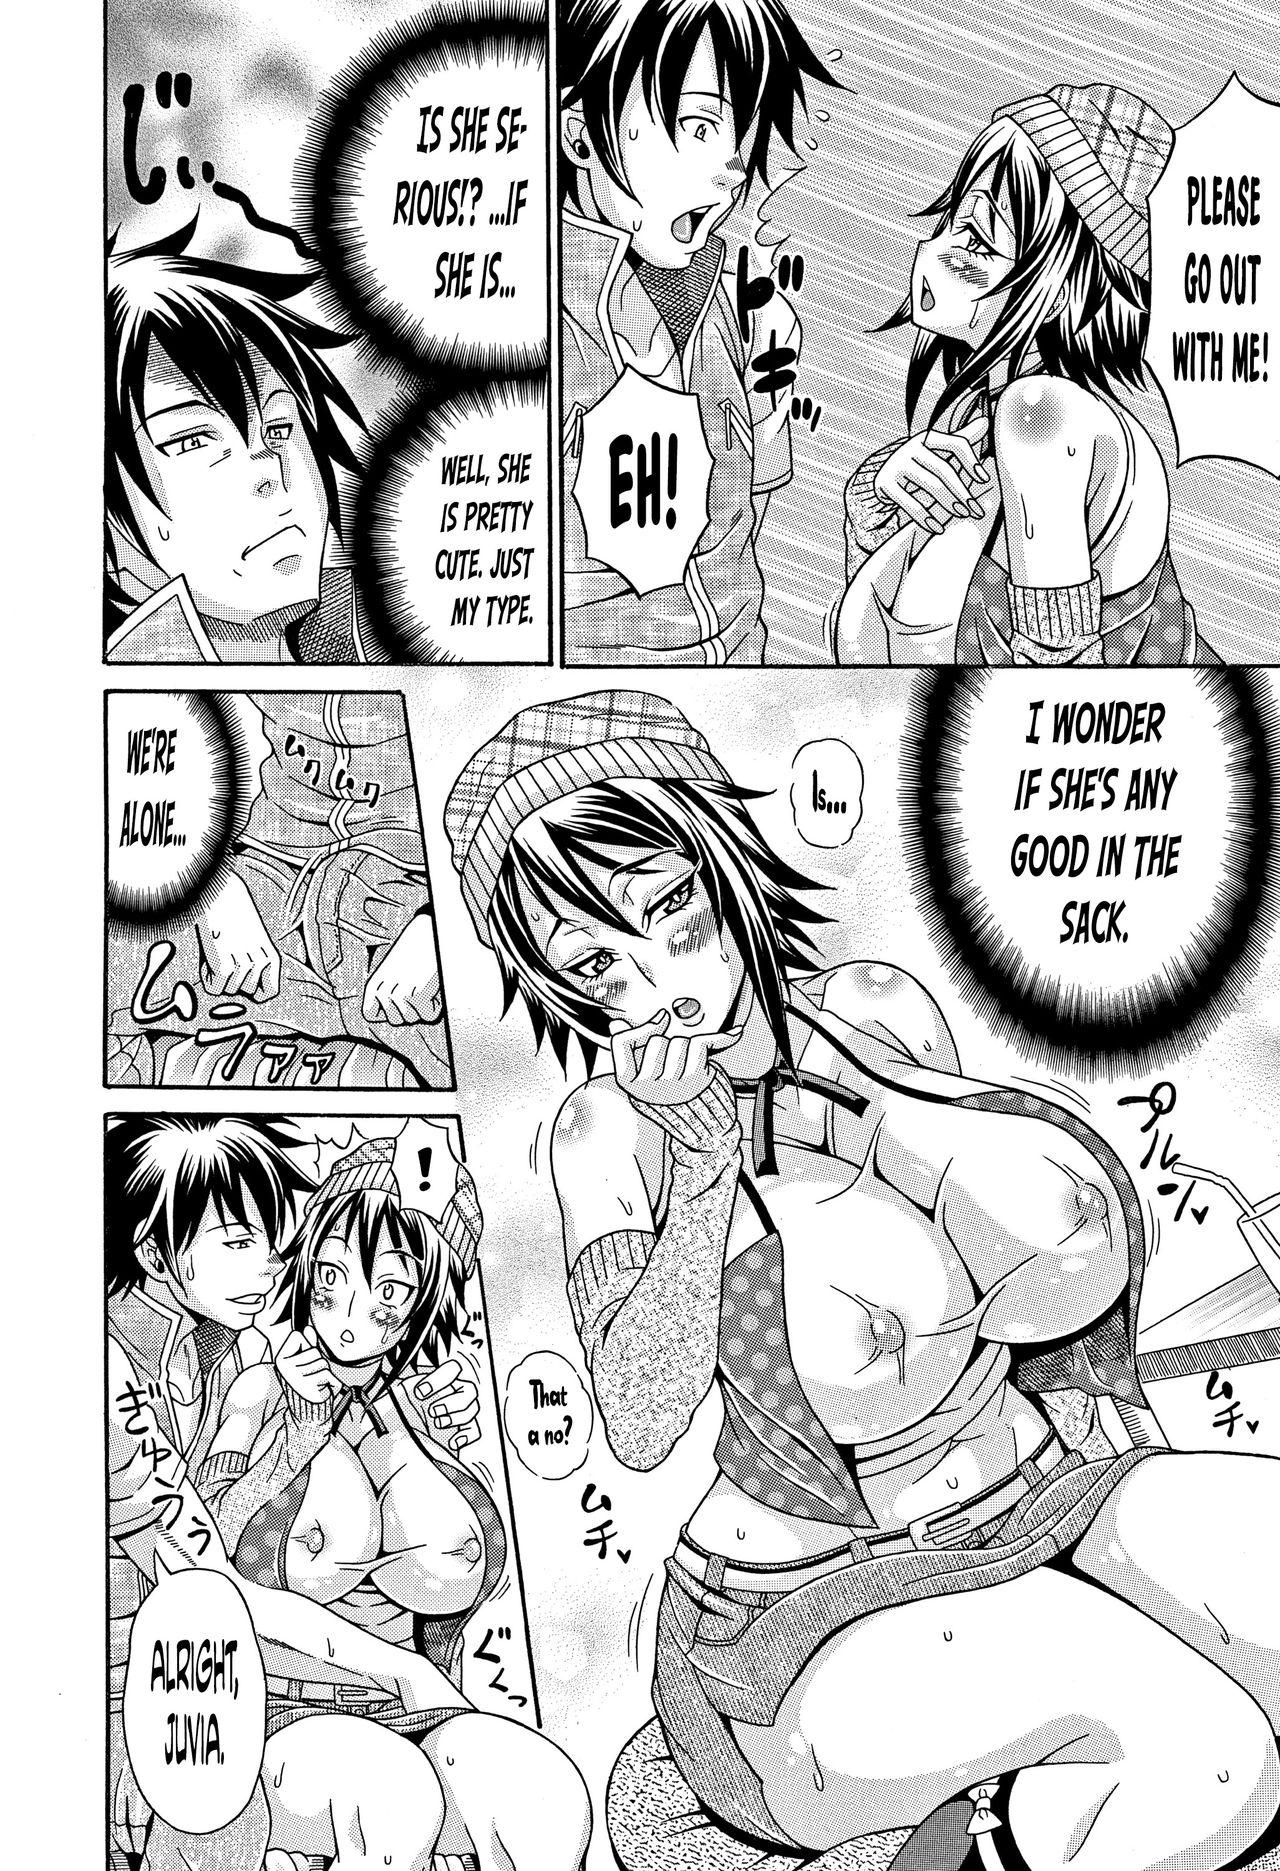 [Andou Hiroyuki] Mamire Chichi - Sticky Tits Feel Hot All Over. Ch.1-10 [English] [doujin-moe.us] 58